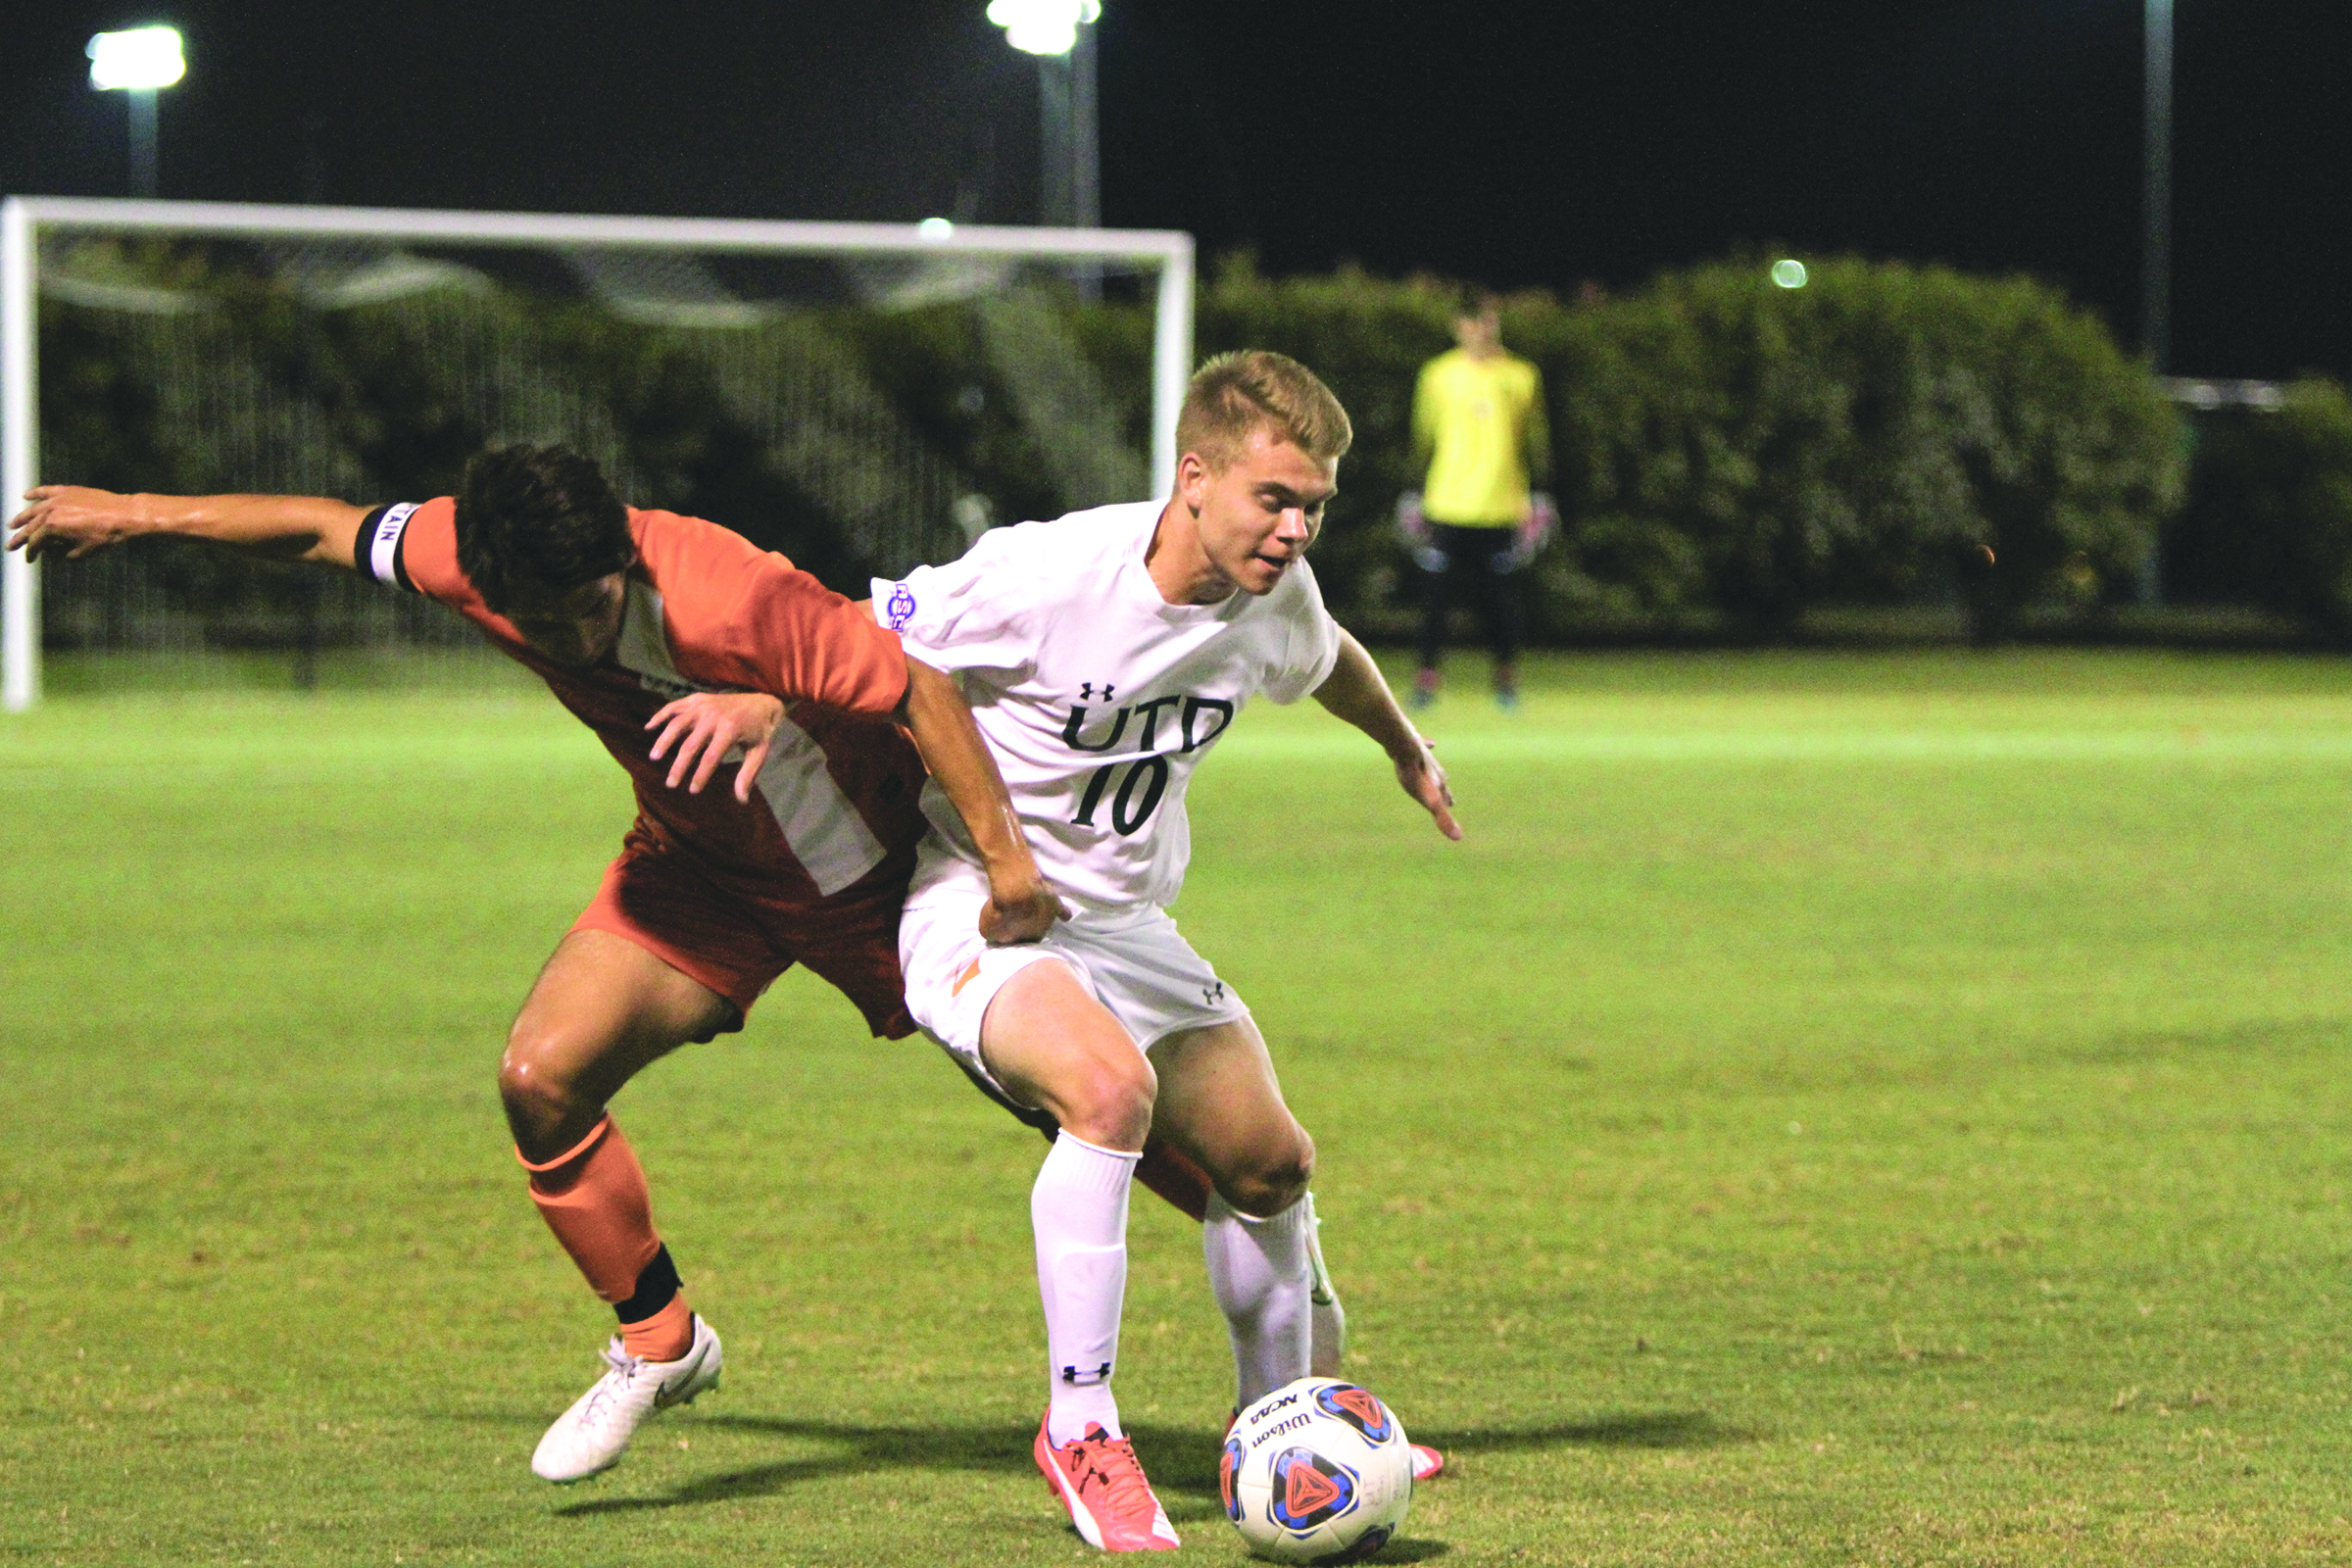 Fall Playoff Preview: Men’s Soccer